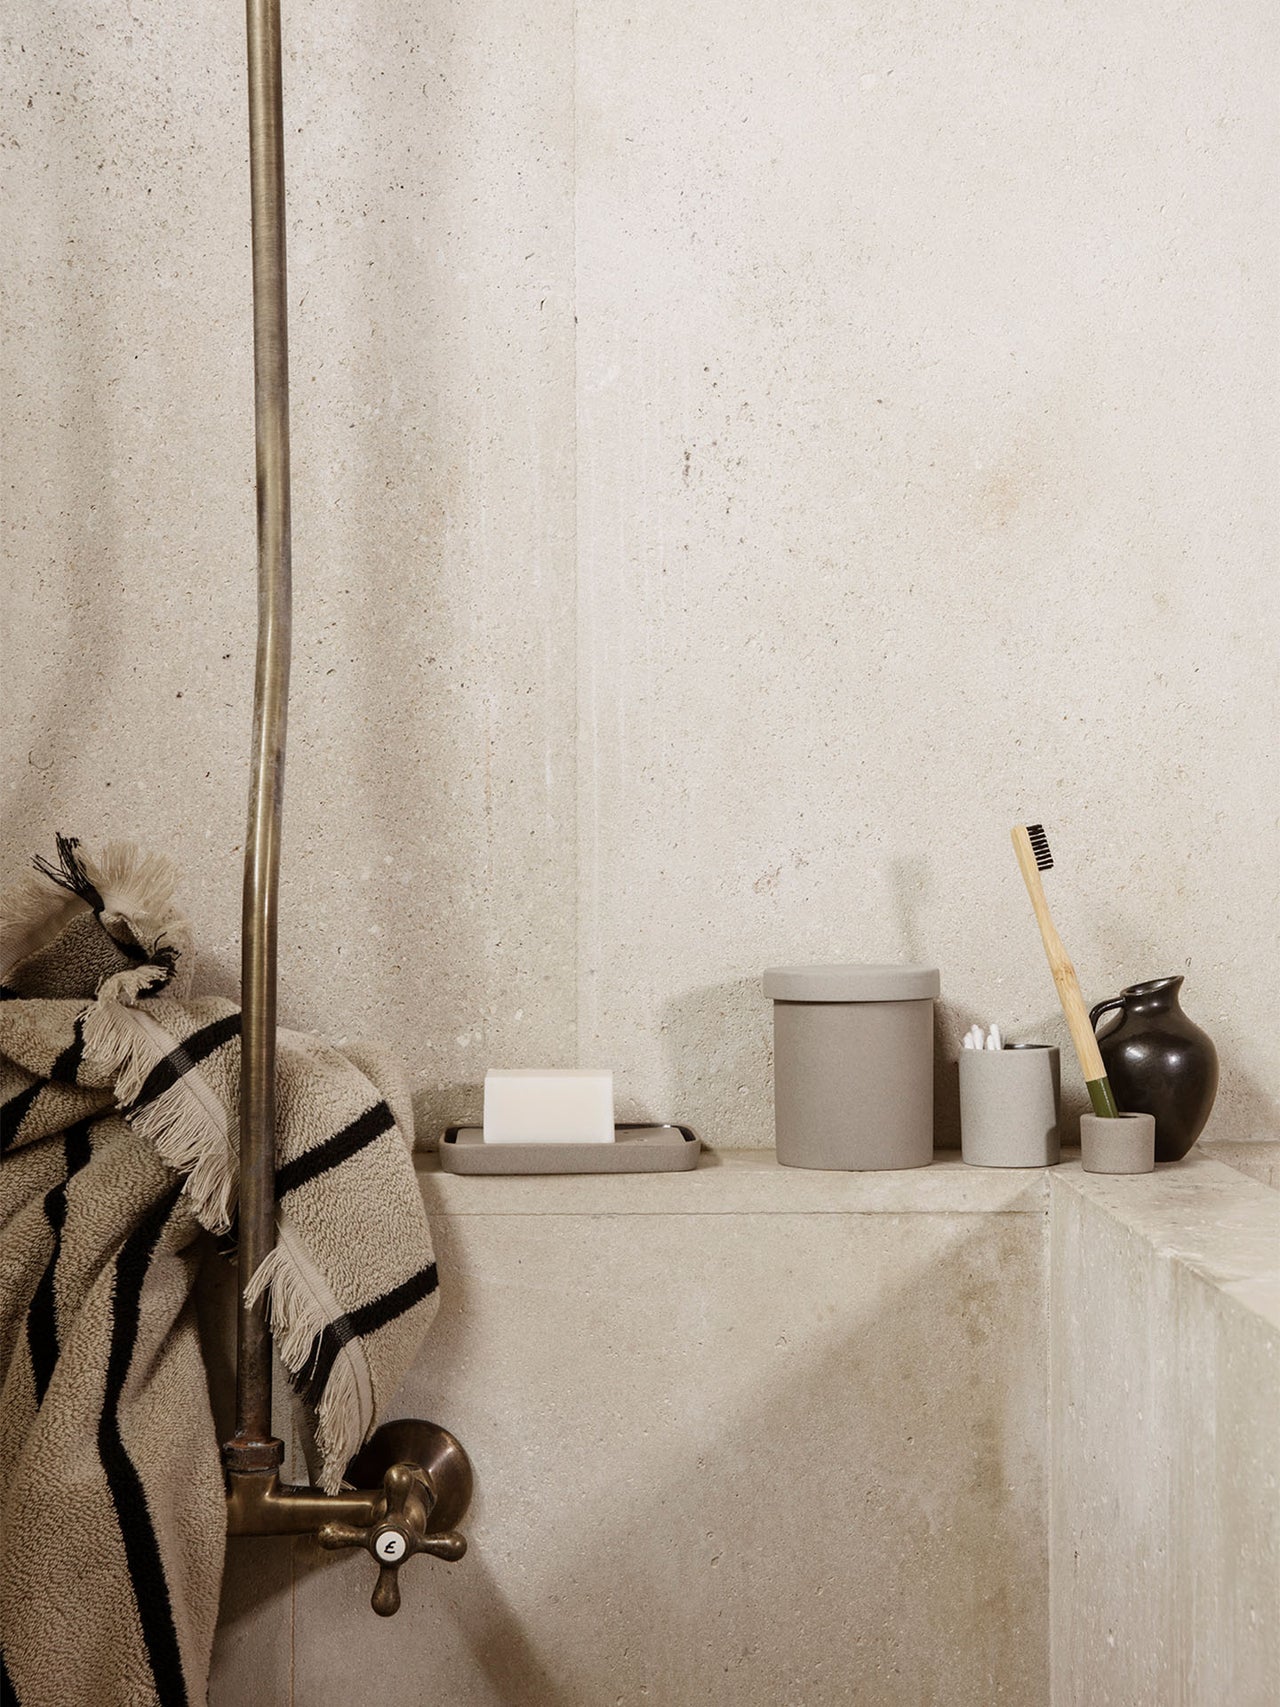 BON ACCESSORIES TOOTHBRUSH HOLDER BY FERM LIVING